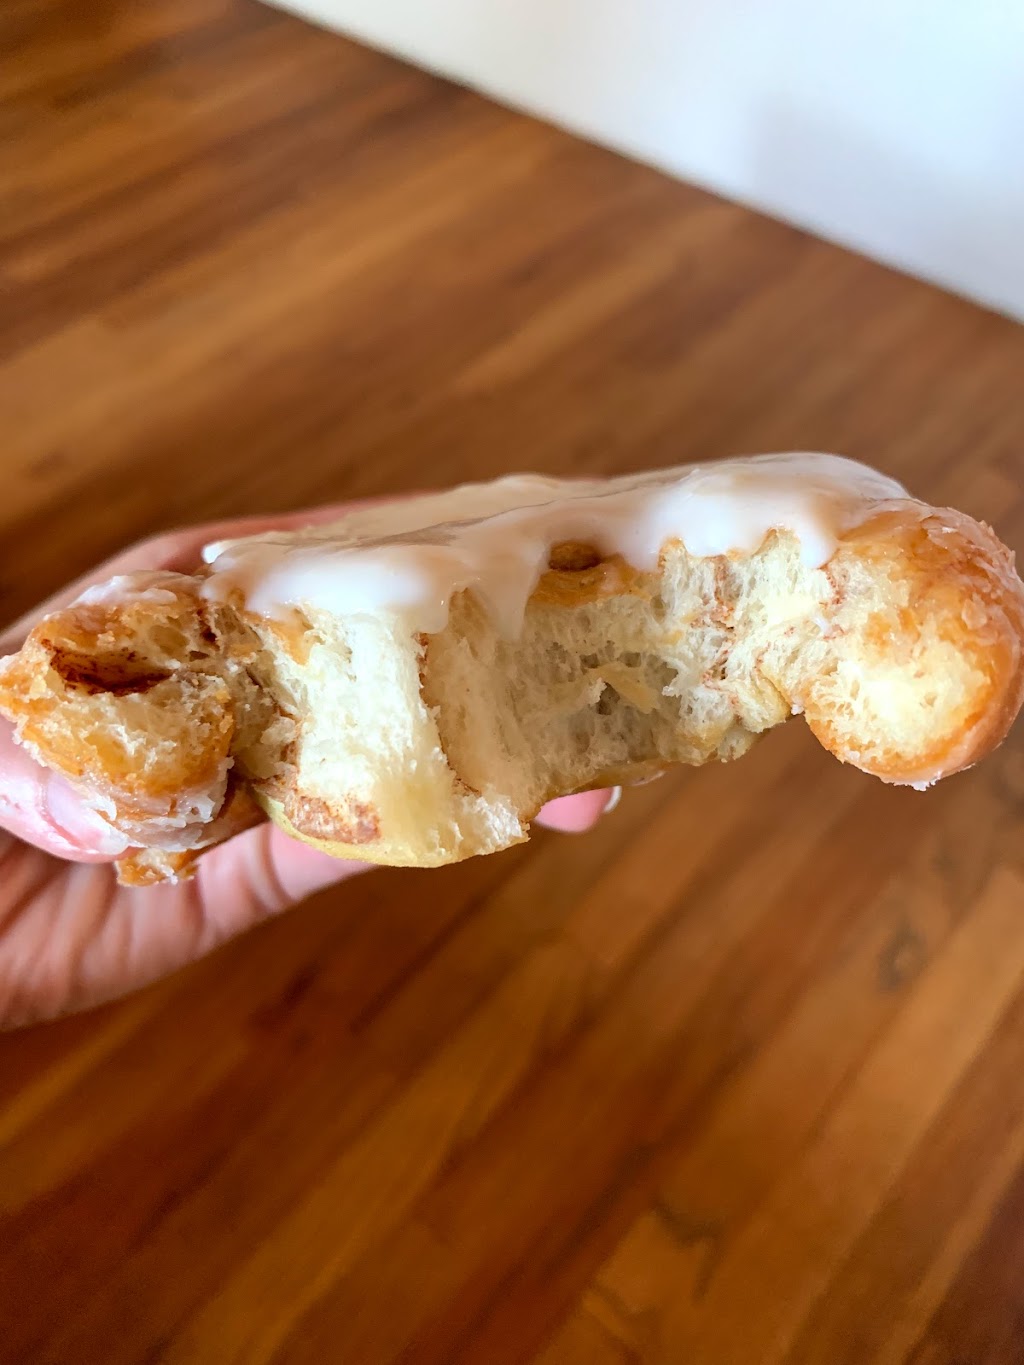 Two Boys Donuts | 6400 Holly Ave NE # H, Albuquerque, NM 87113 | Phone: (505) 302-0102